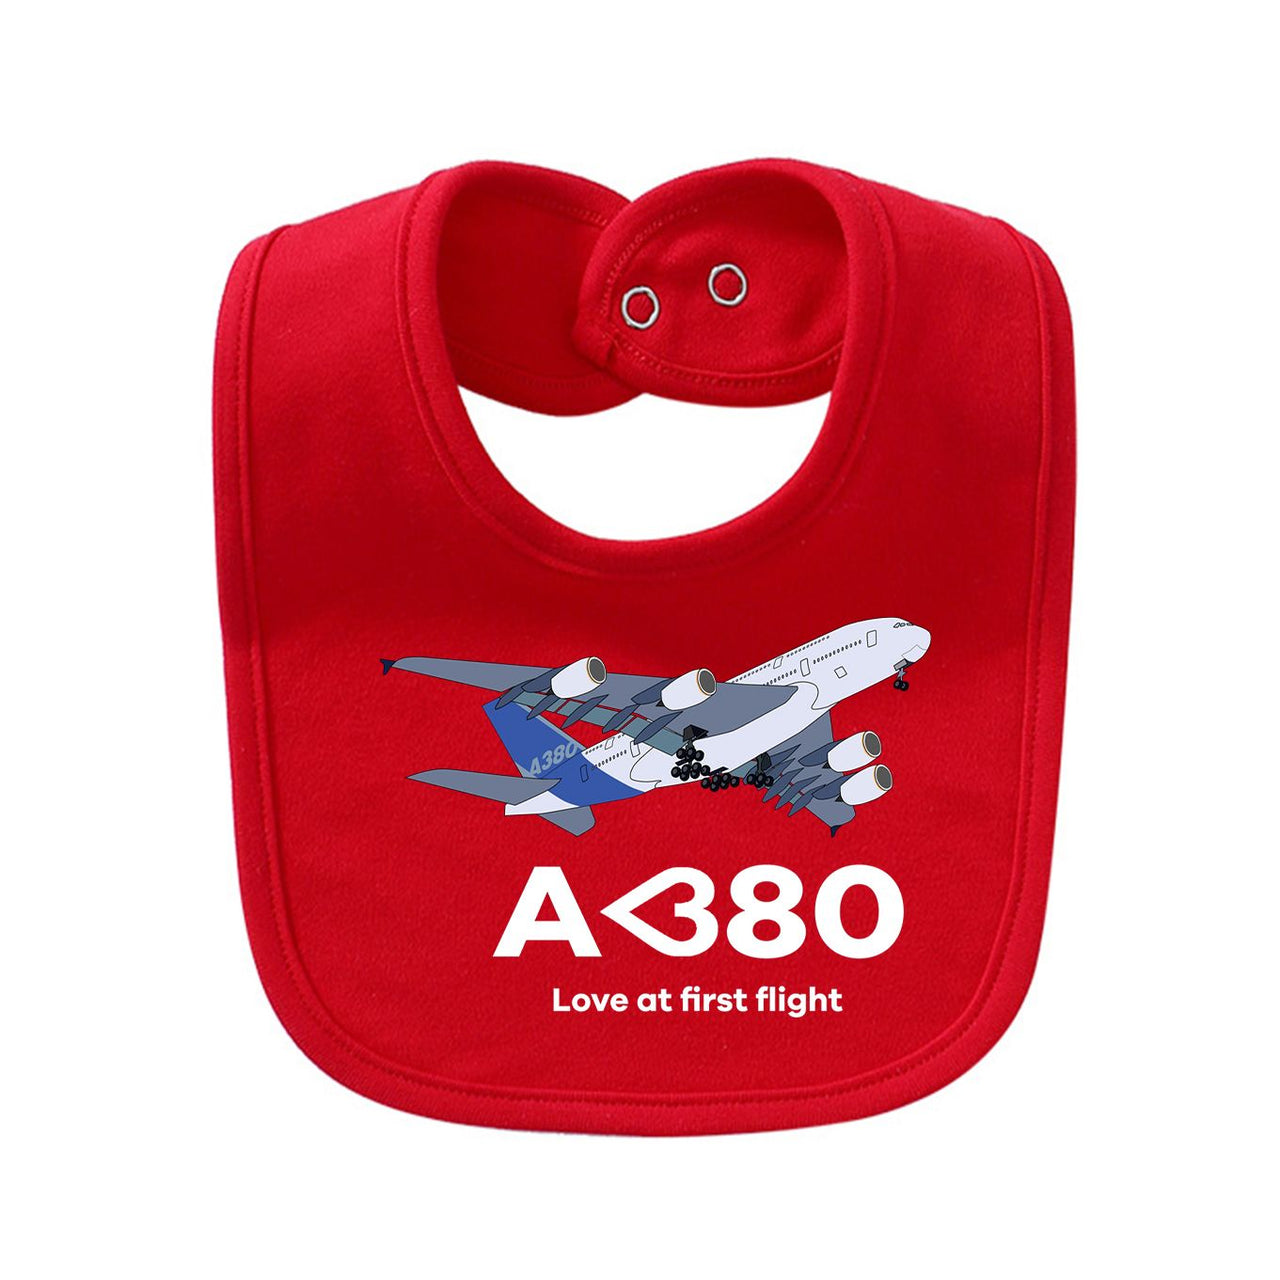 Airbus A380 Love at first flight Designed Baby Saliva & Feeding Towels